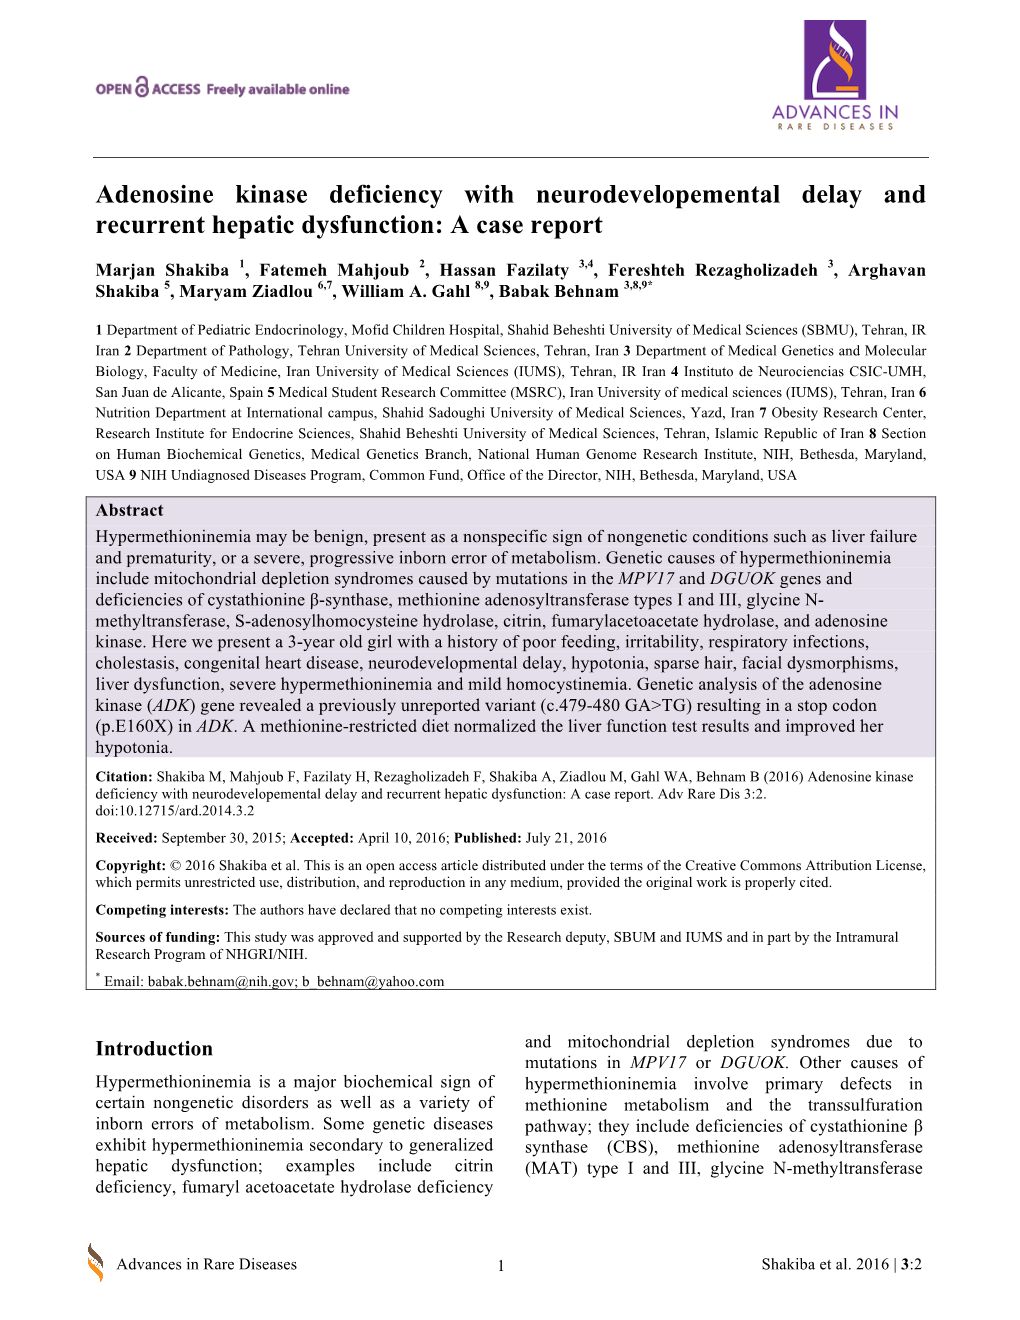 Adenosine Kinase Deficiency with Neurodevelopemental Delay and Recurrent Hepatic Dysfunction: a Case Report